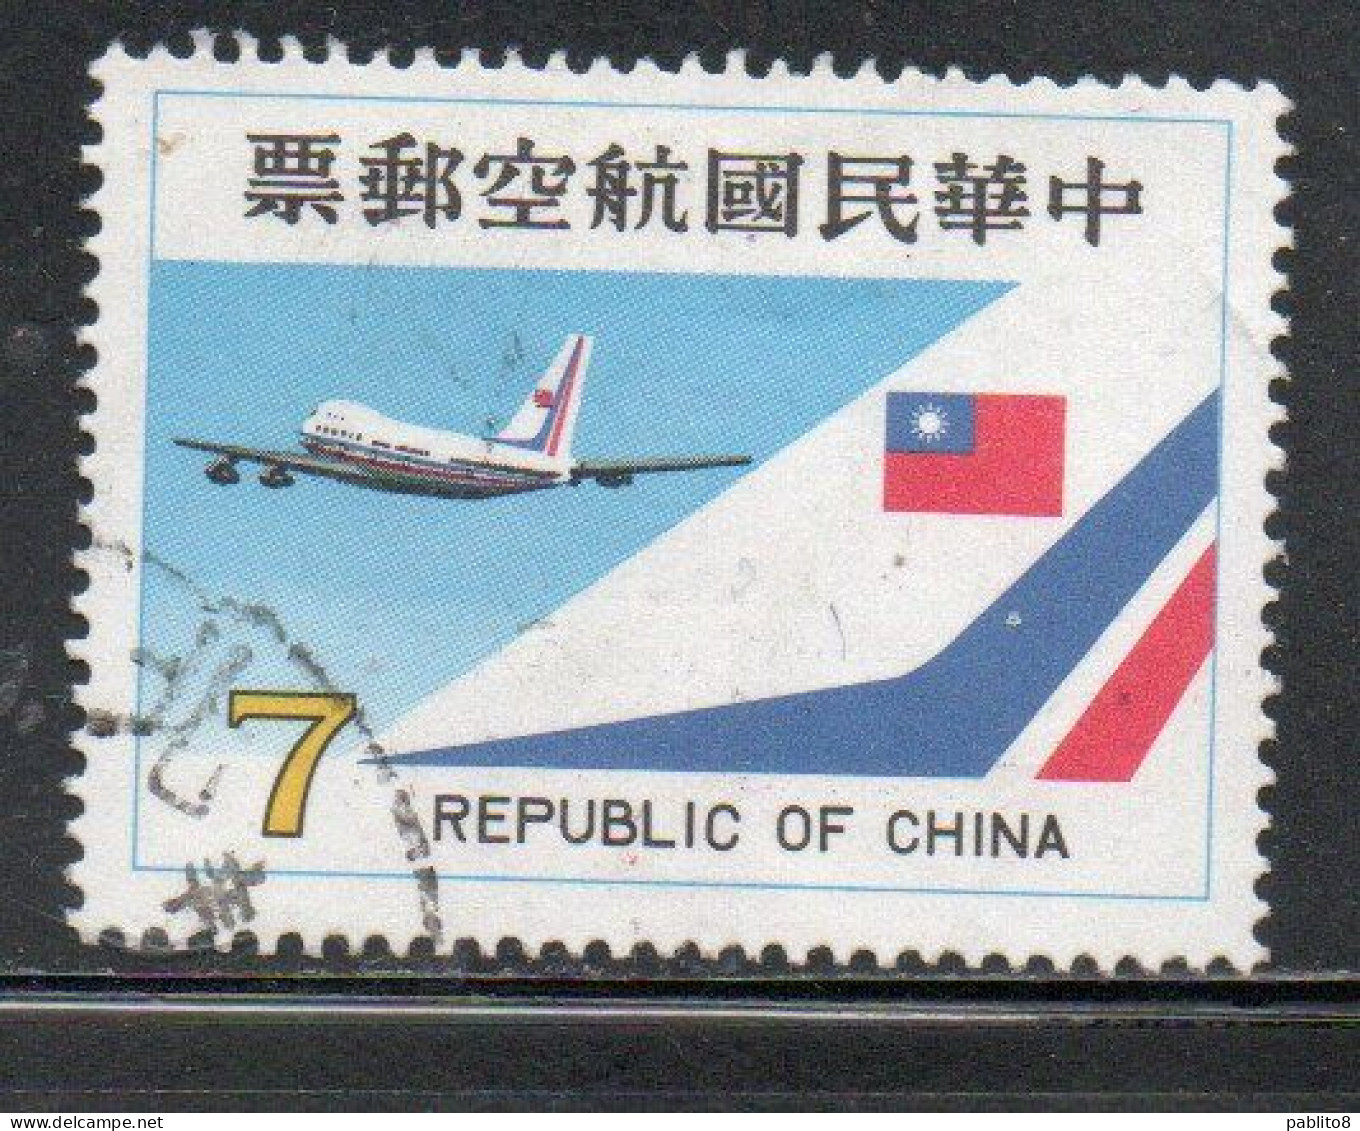 CHINA REPUBLIC CINA TAIWAN FORMOSA 1980 AIR POST MAIL AIRMAIL CHINA AIRLINES JET 7$ USED USATO OBLITERE' - Corréo Aéreo